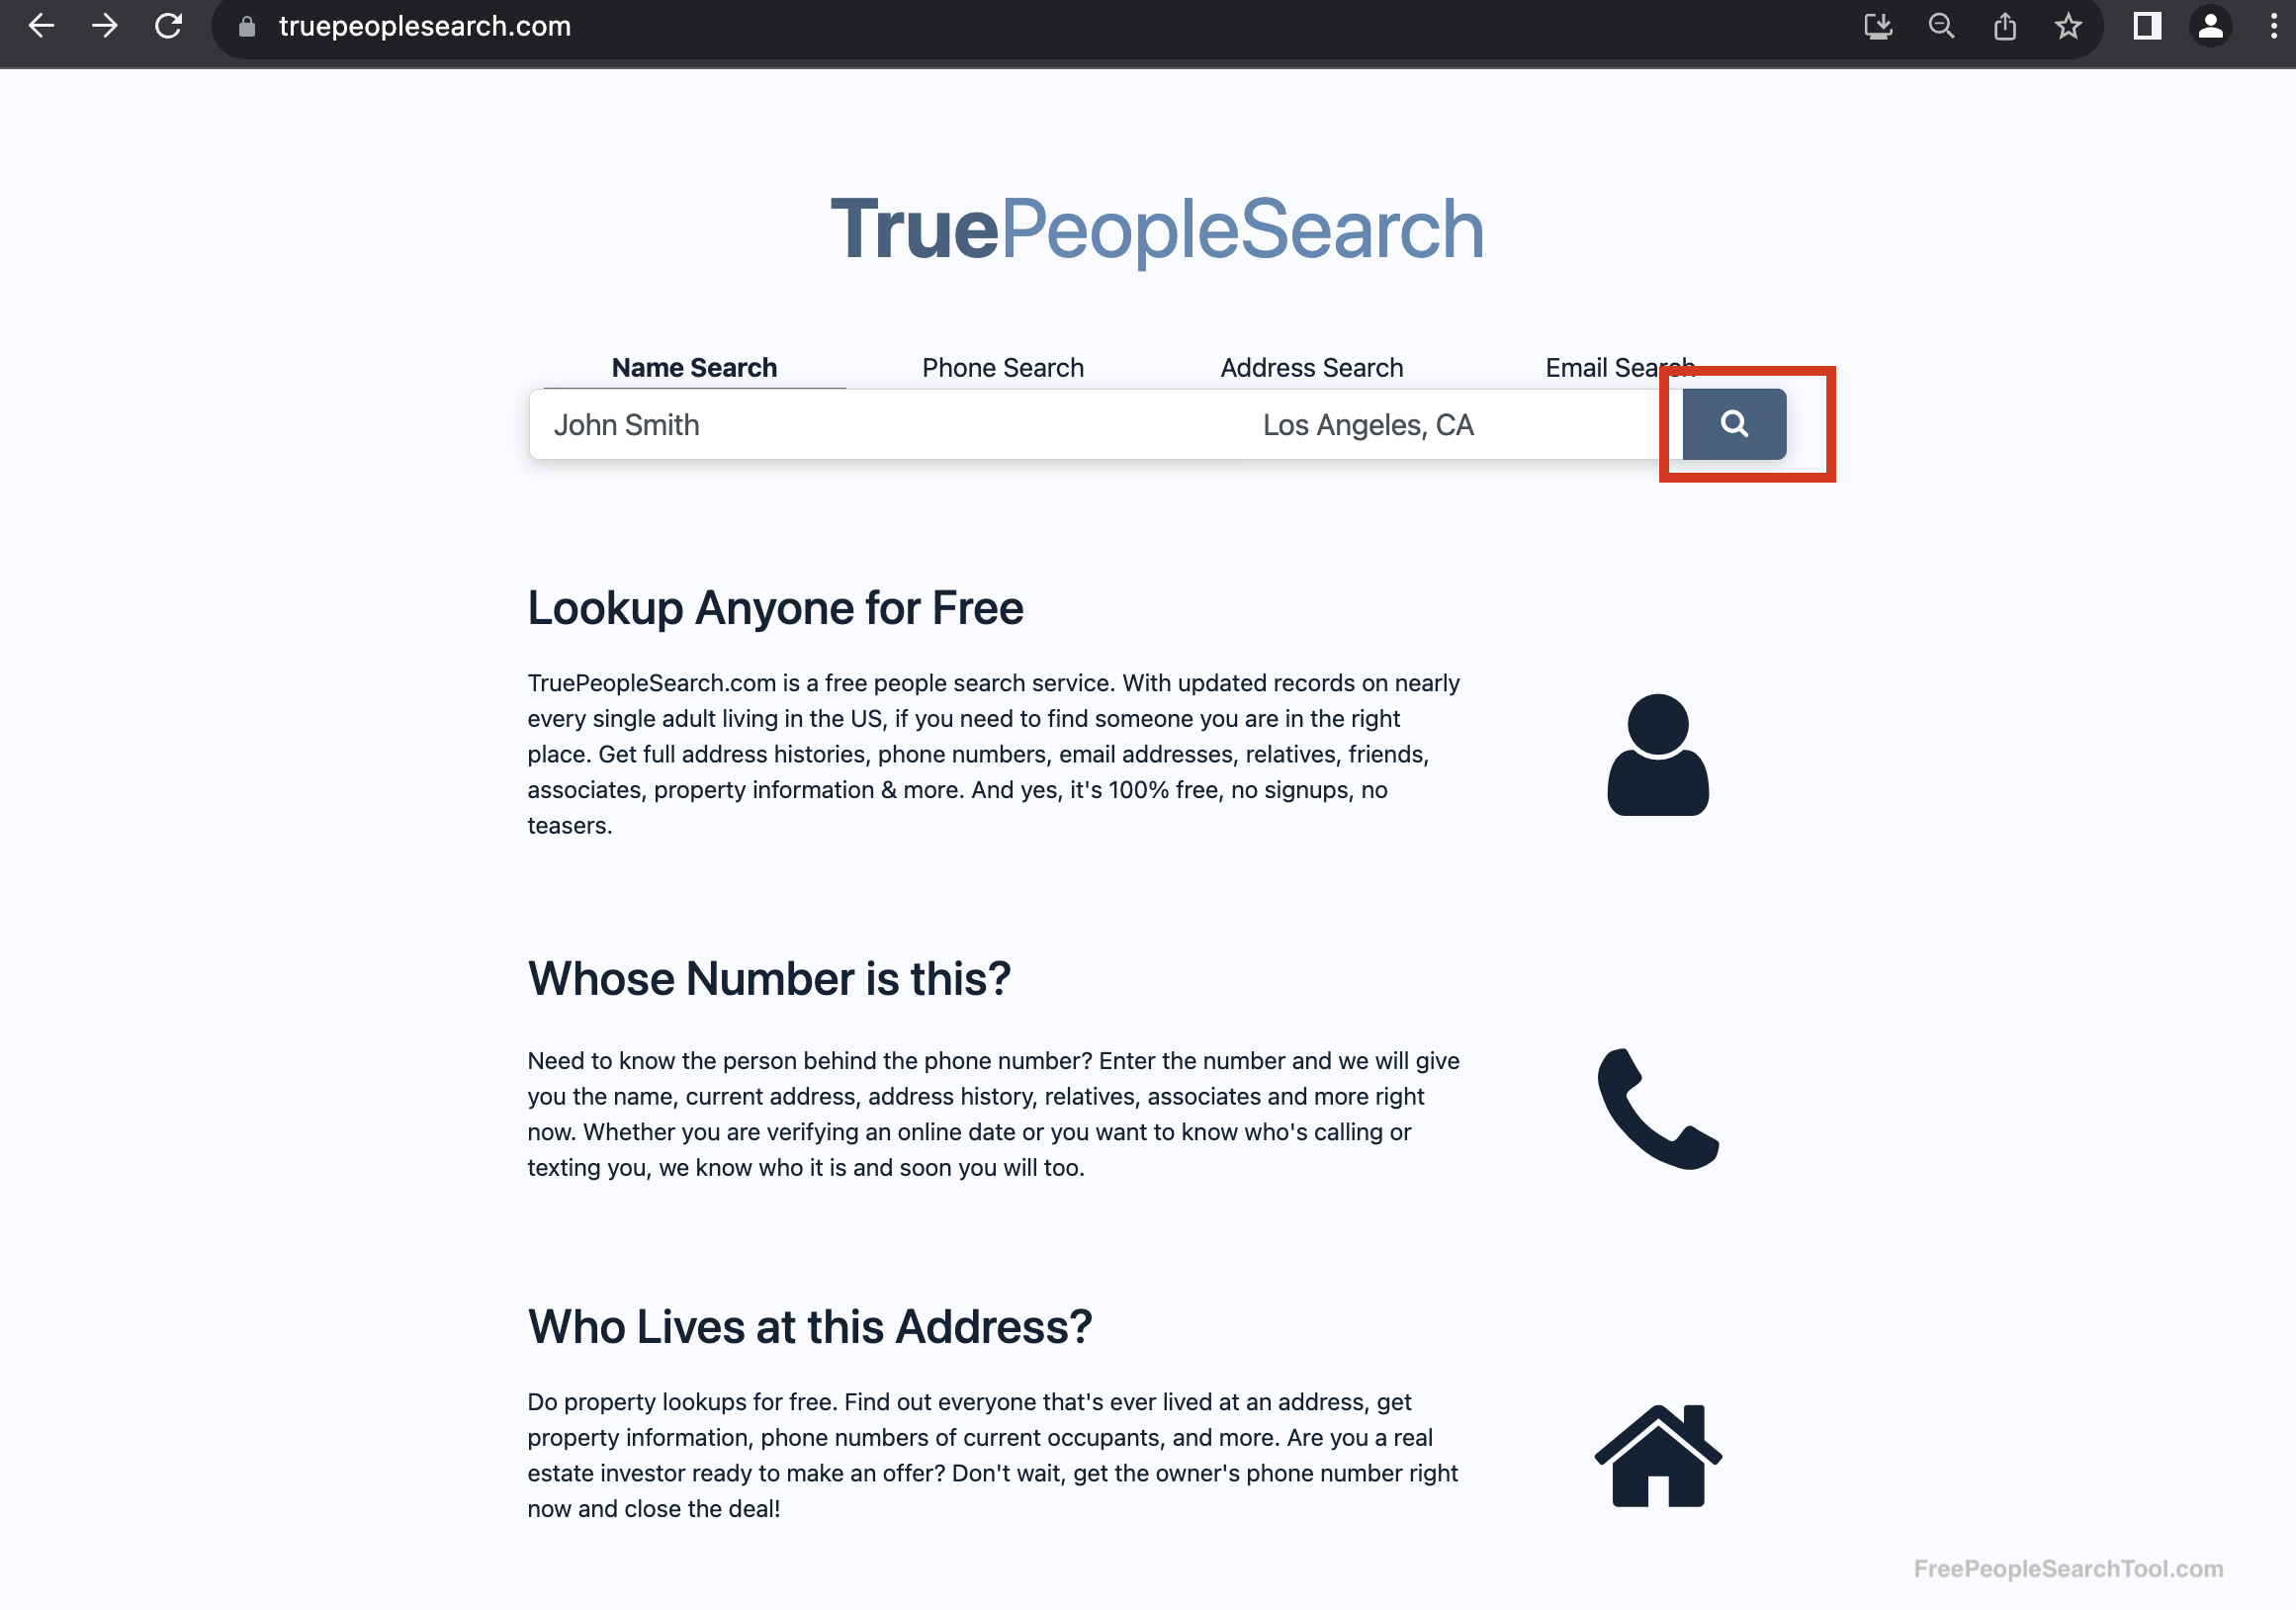 truepeoplesearch opt out search